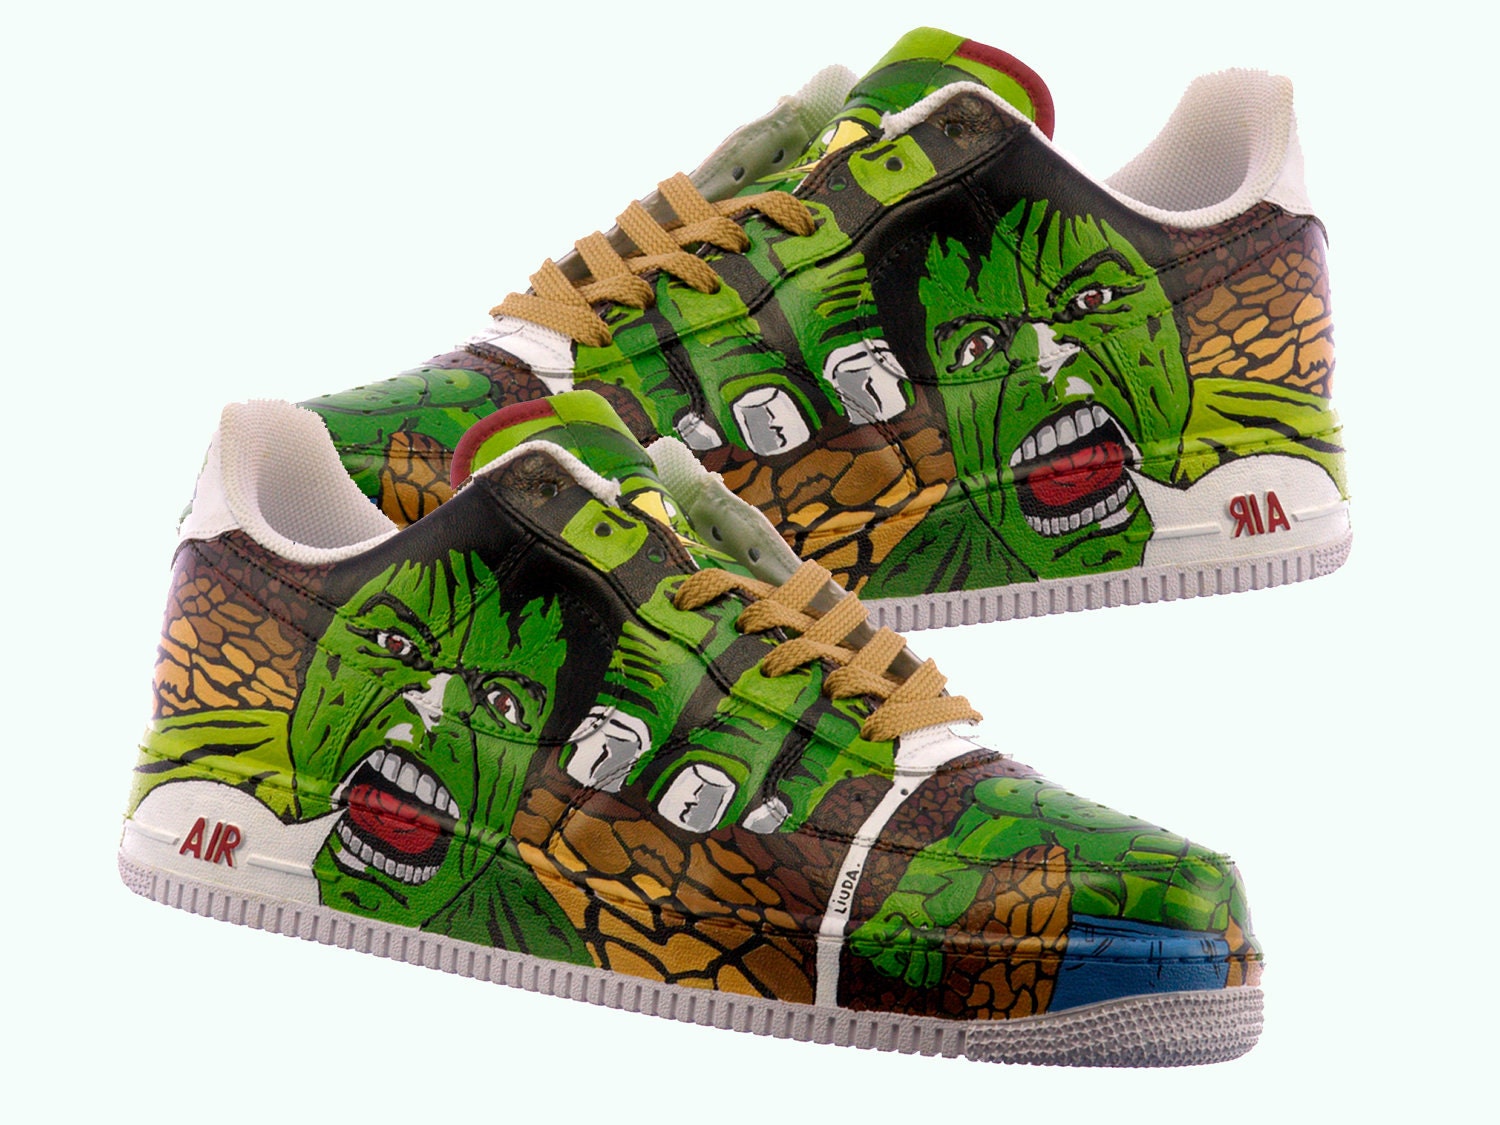 Hulk Hand Painted Shoes The incredible Hulk Shoes by PonkoWorld